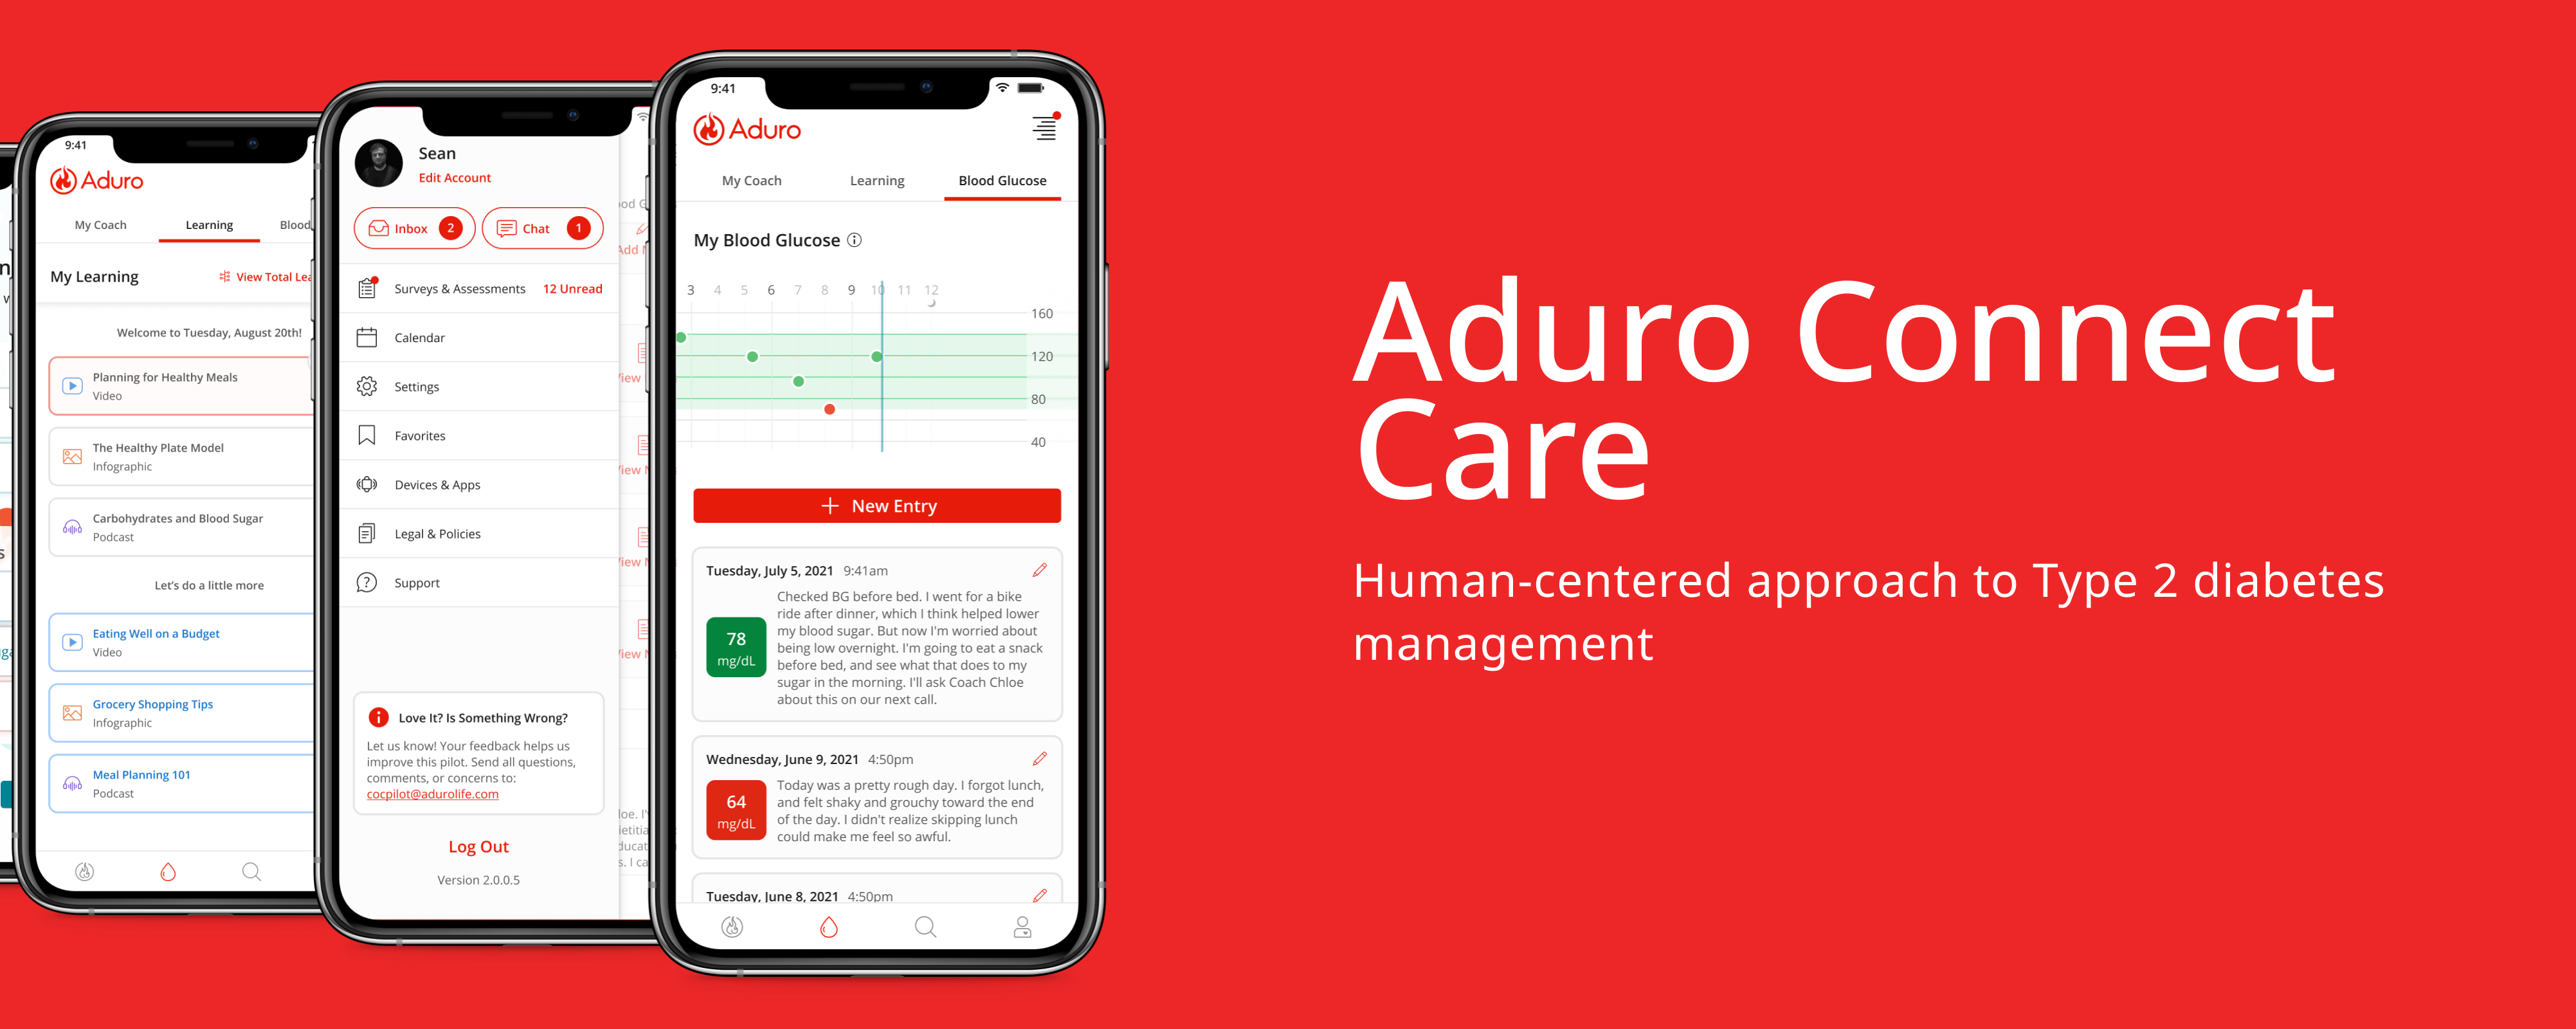 Aduro Connect Care: Human-centered approach to Type 2 diabetes management